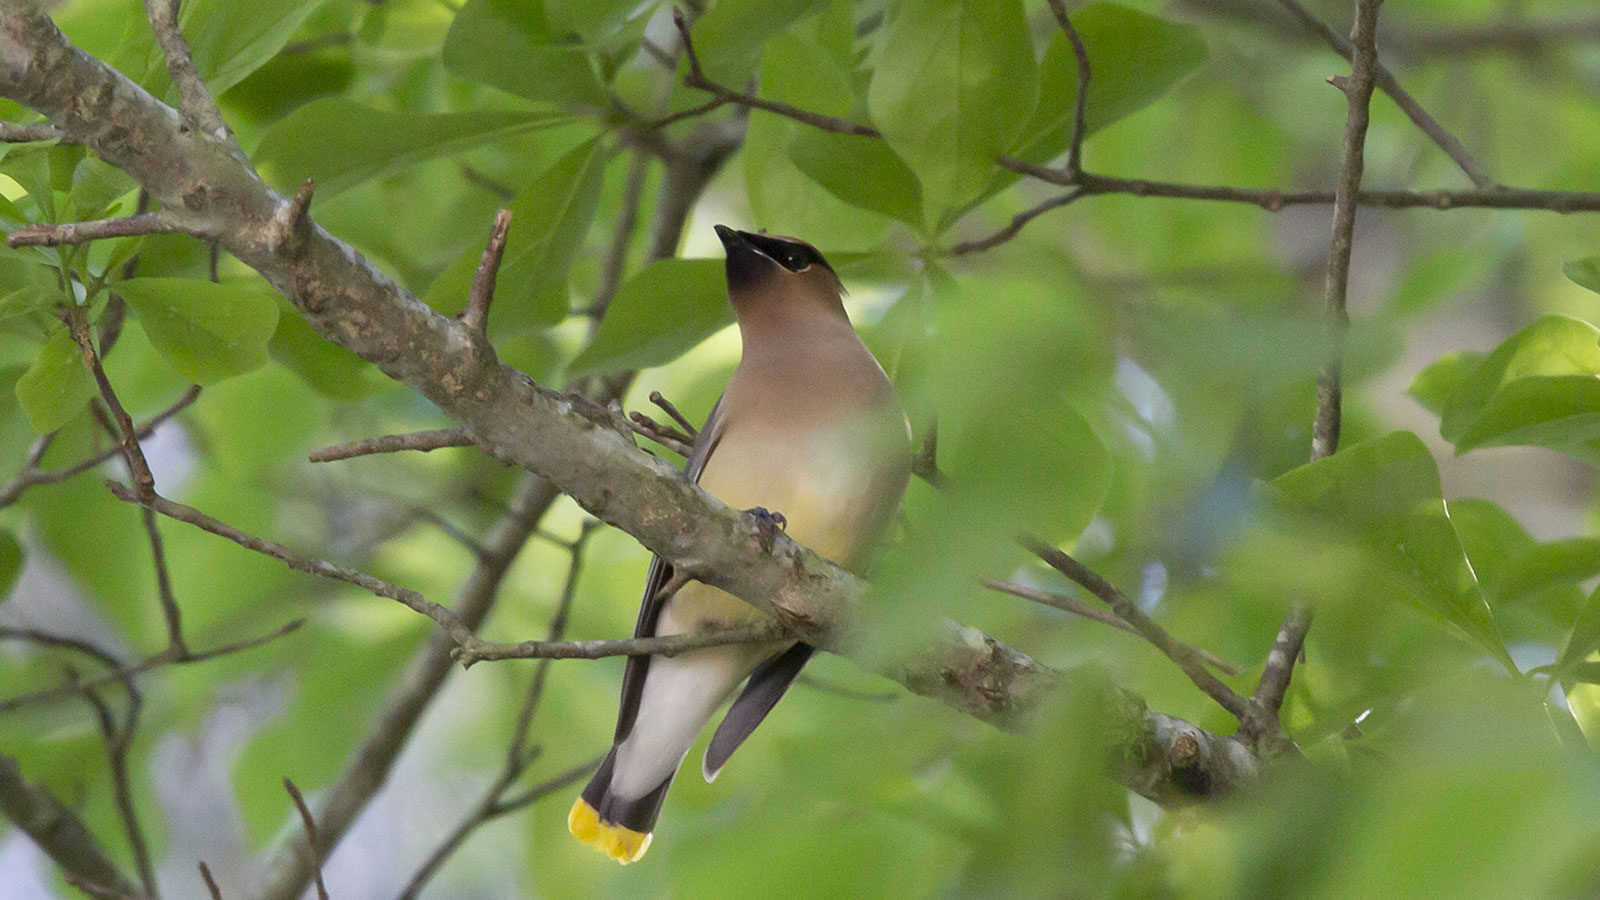 Cedar waxwing perched on a tree branch